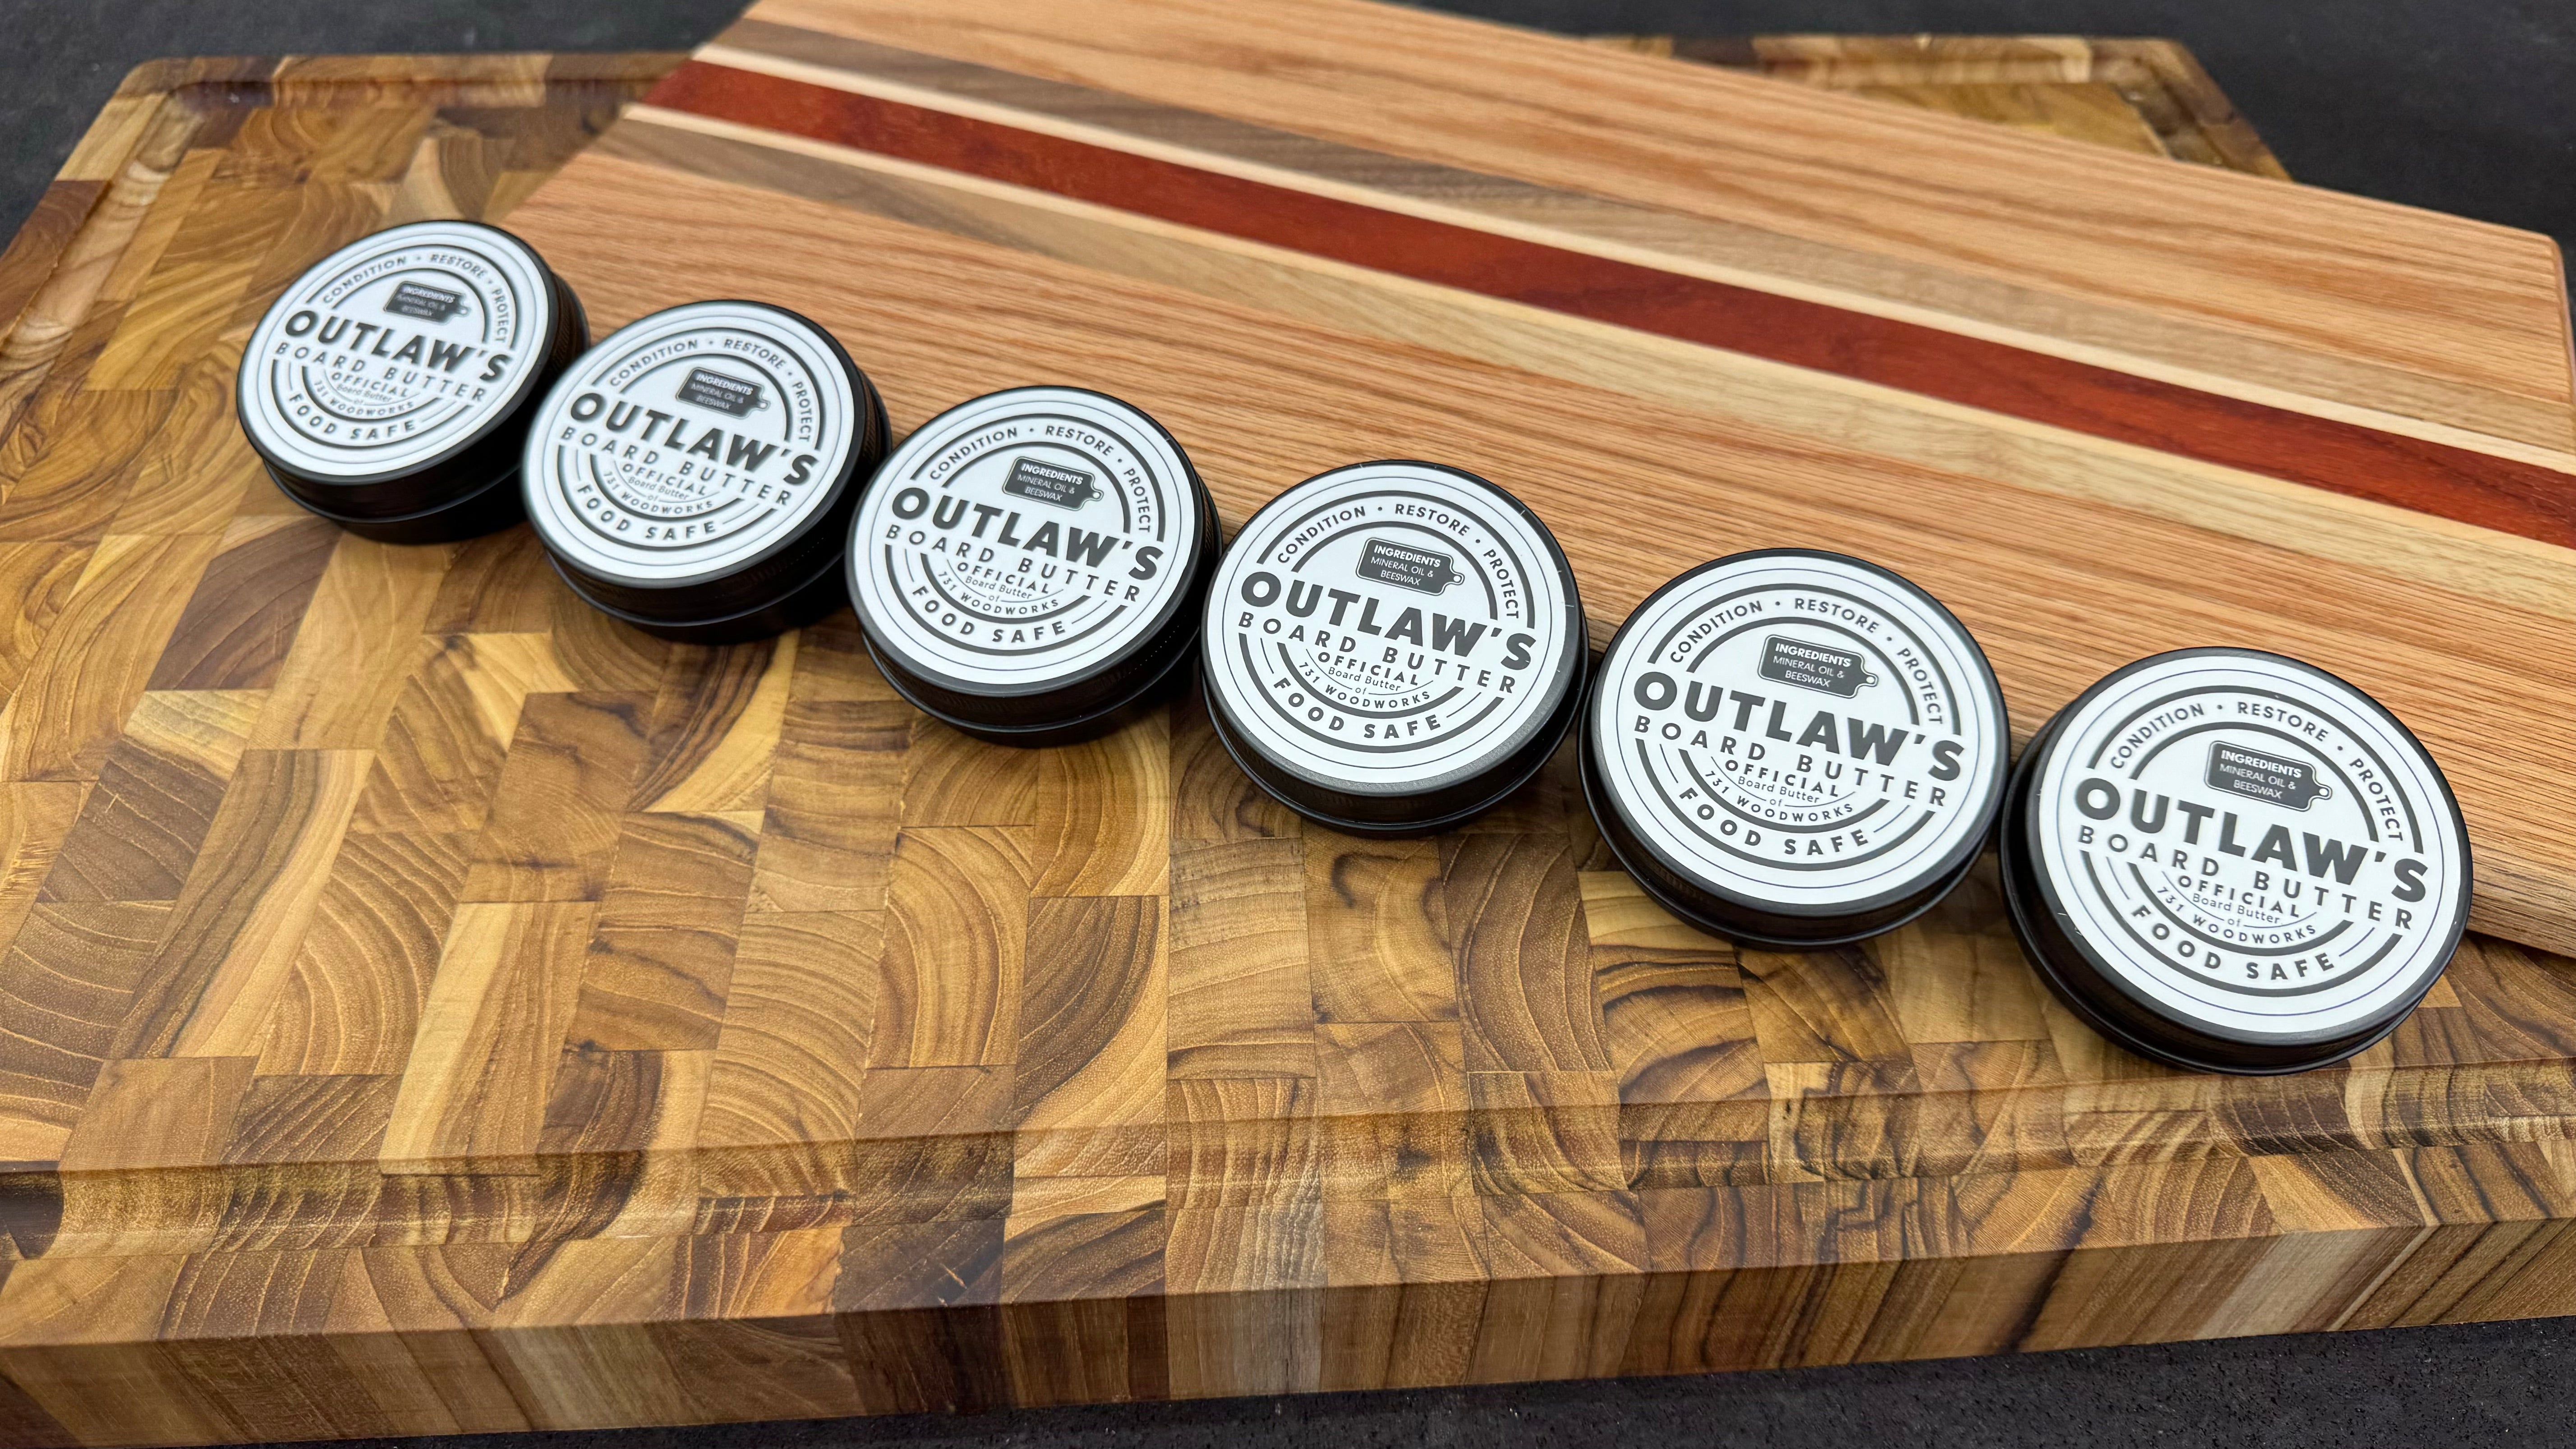 Bandit Multi-Pack Outlaw's Board Butter